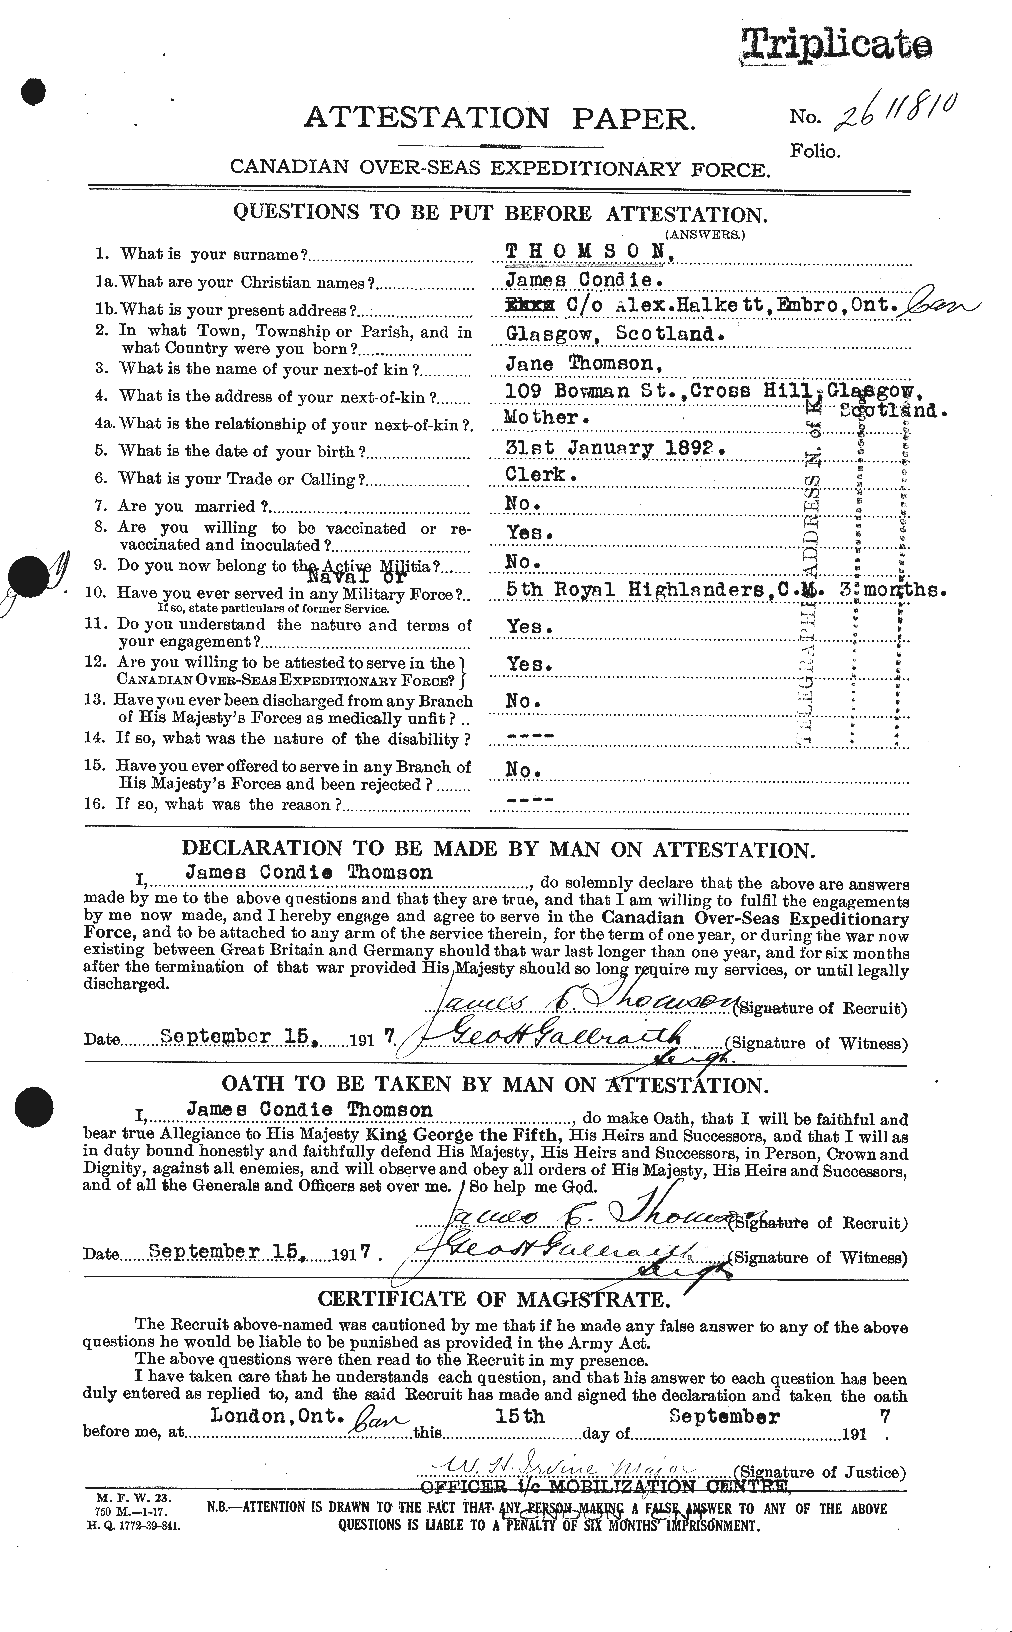 Personnel Records of the First World War - CEF 633823a